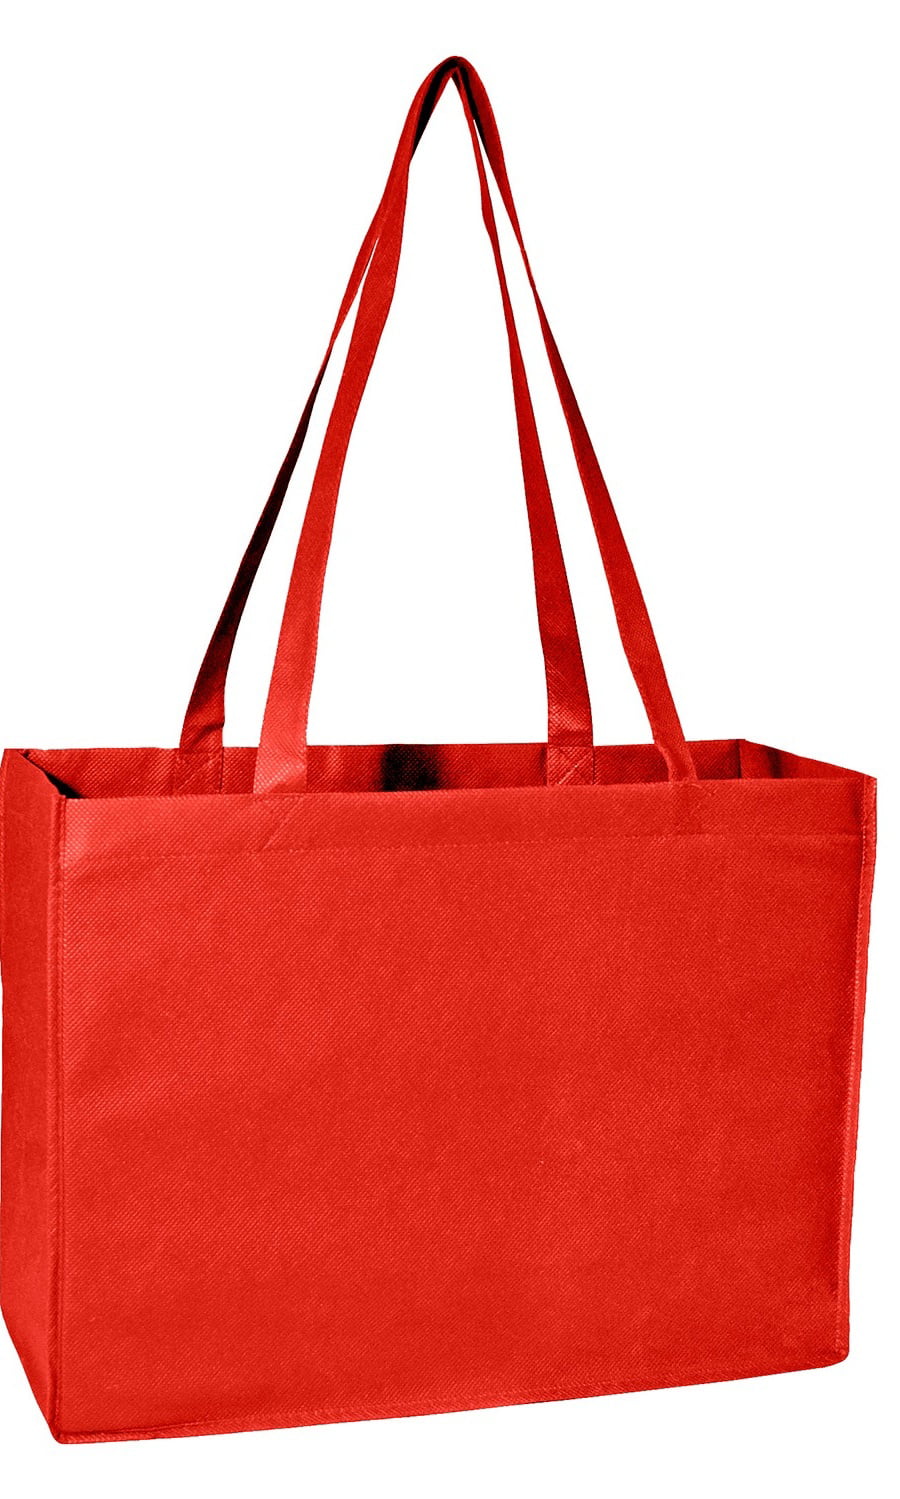 Liberty Bags A134 Non-Woven Deluxe Tote - Red - One Size